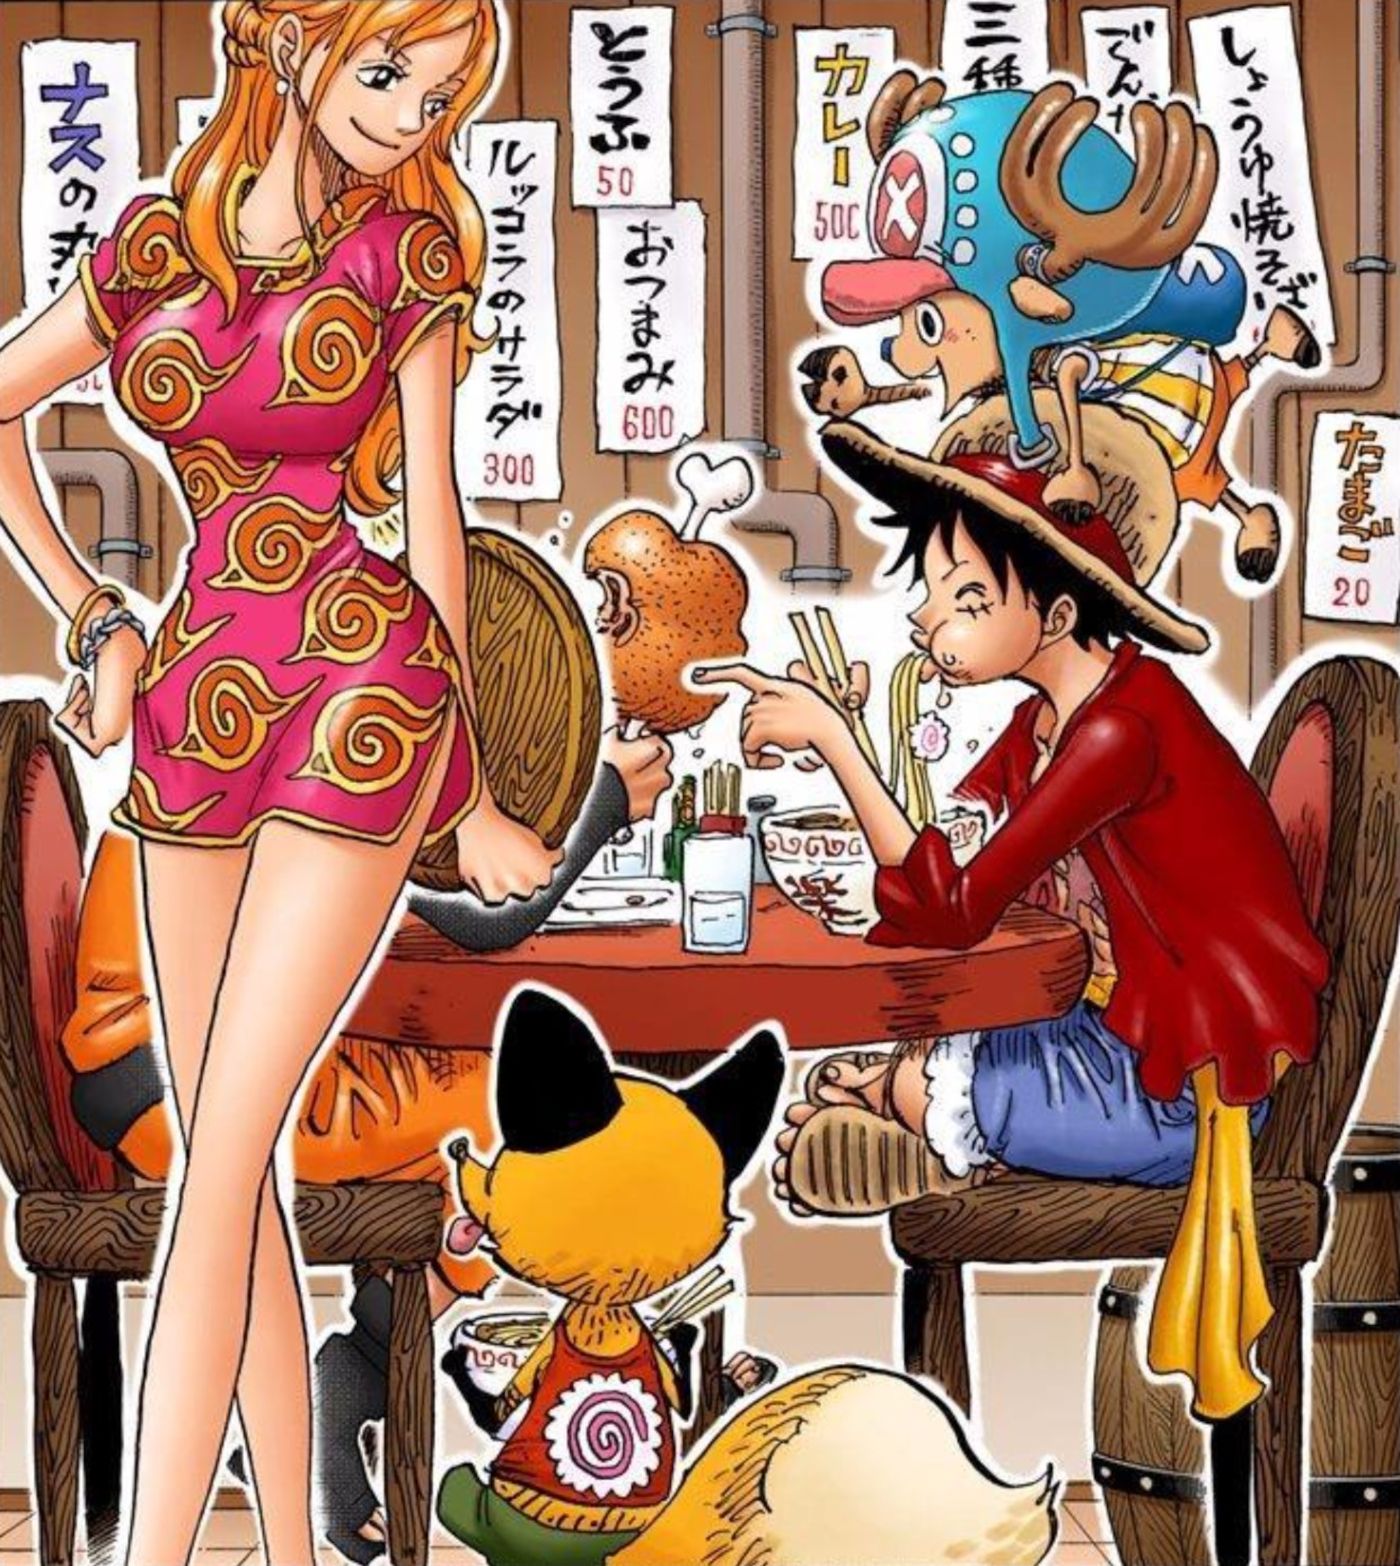 Colored manga panel from One Piece chapter 766 shows Luffy sharing food with Naruto, who is obscured by Nami wearing a dress covered with Konoha's symbol.